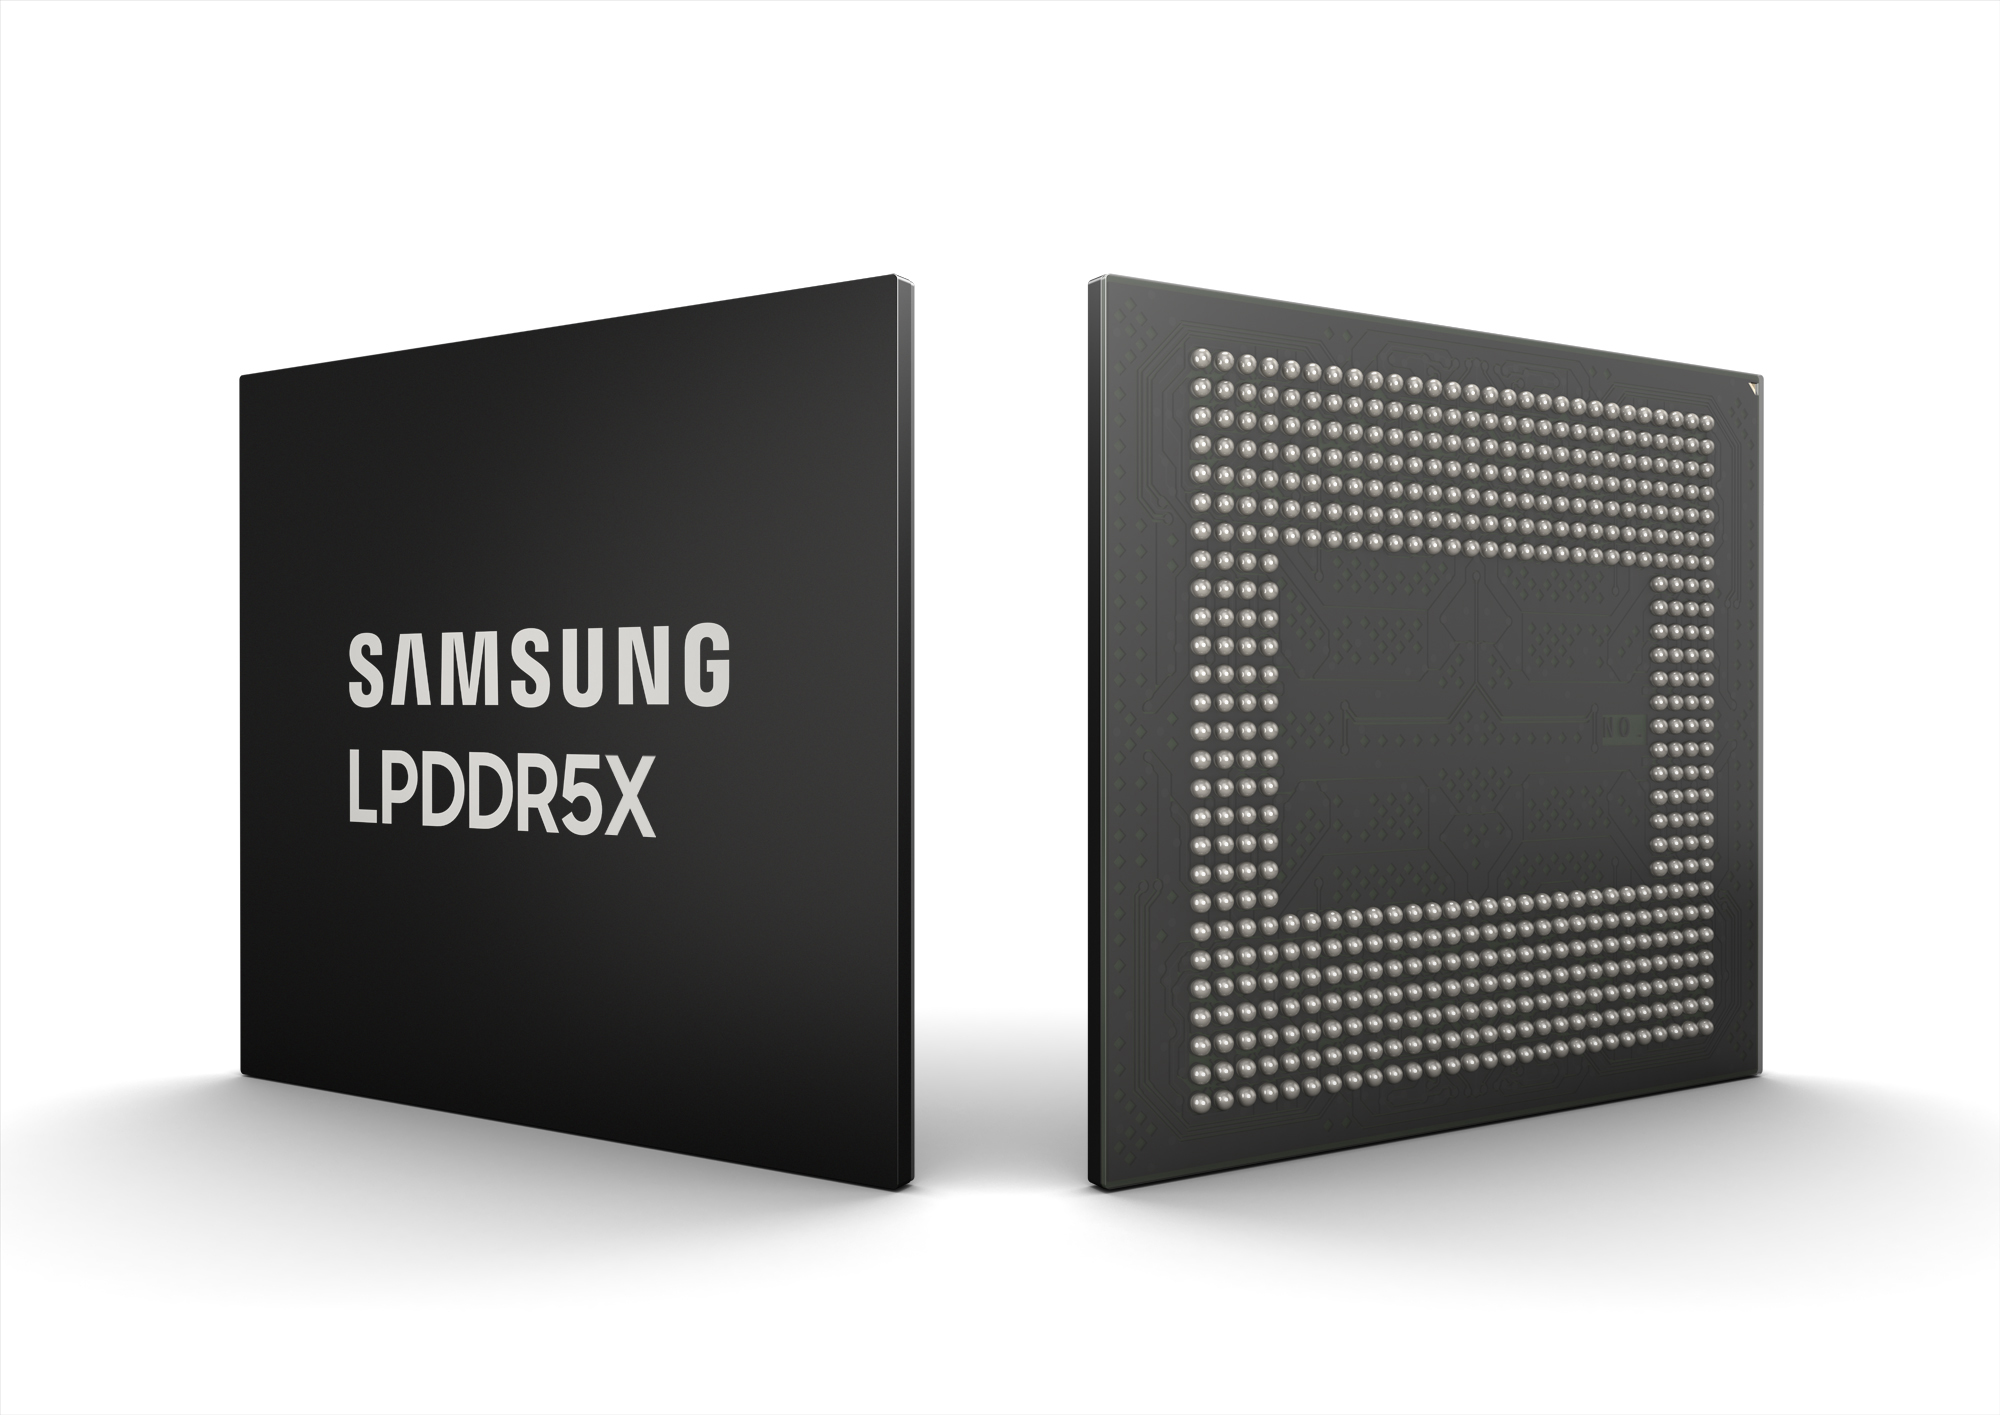 Samsung's new 10.7Gbps LPDDR5X DRAM delivers 25% higher performance